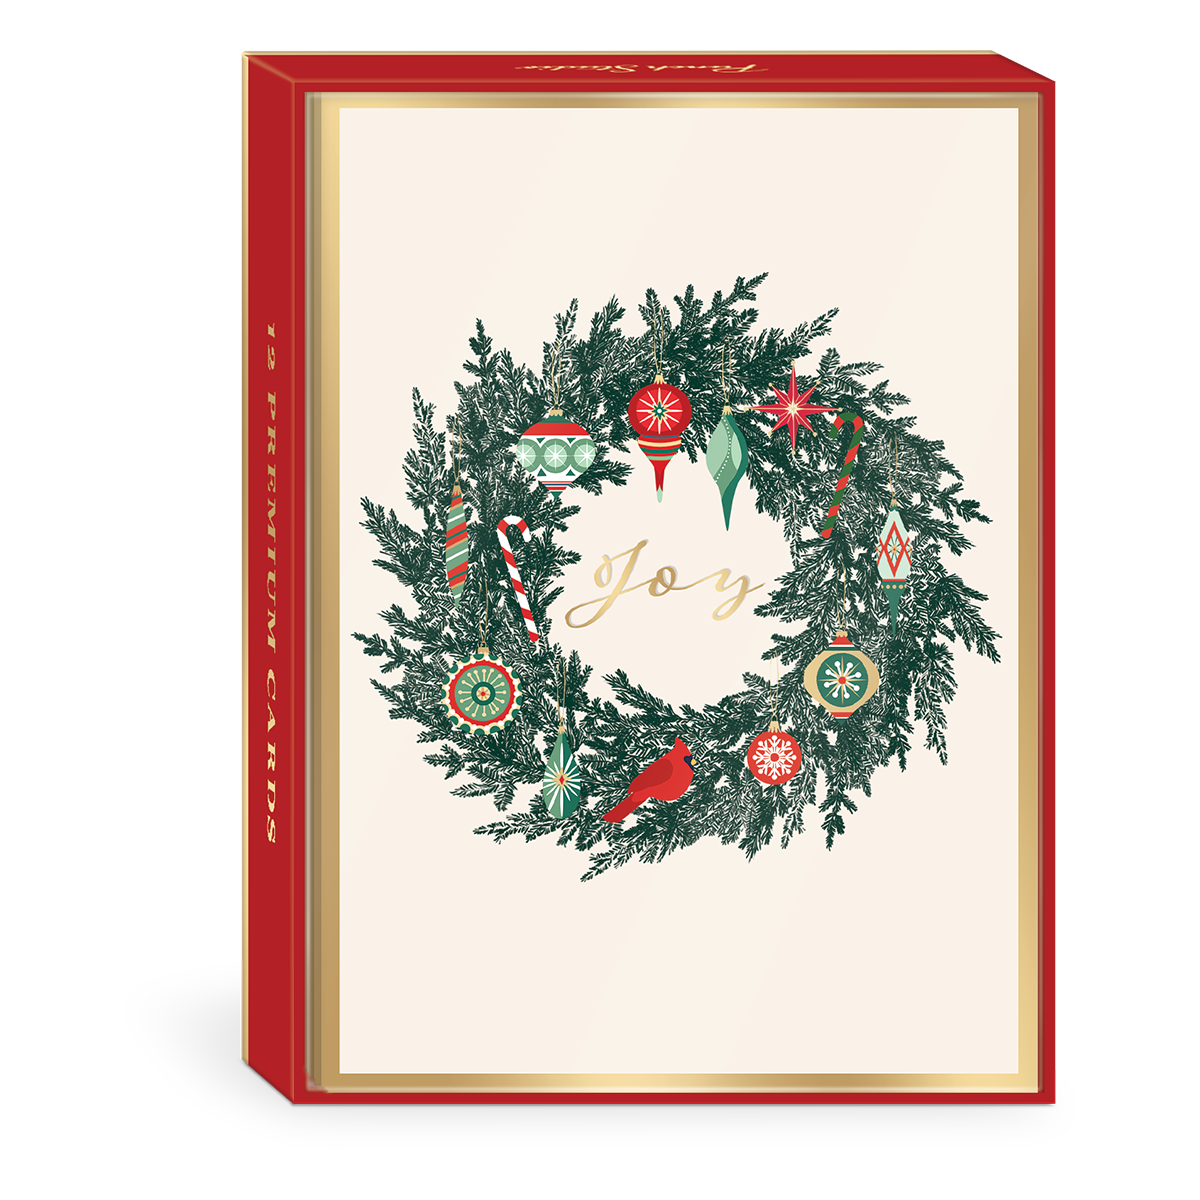 Vintage Wreath Boxed Holiday Cards Product